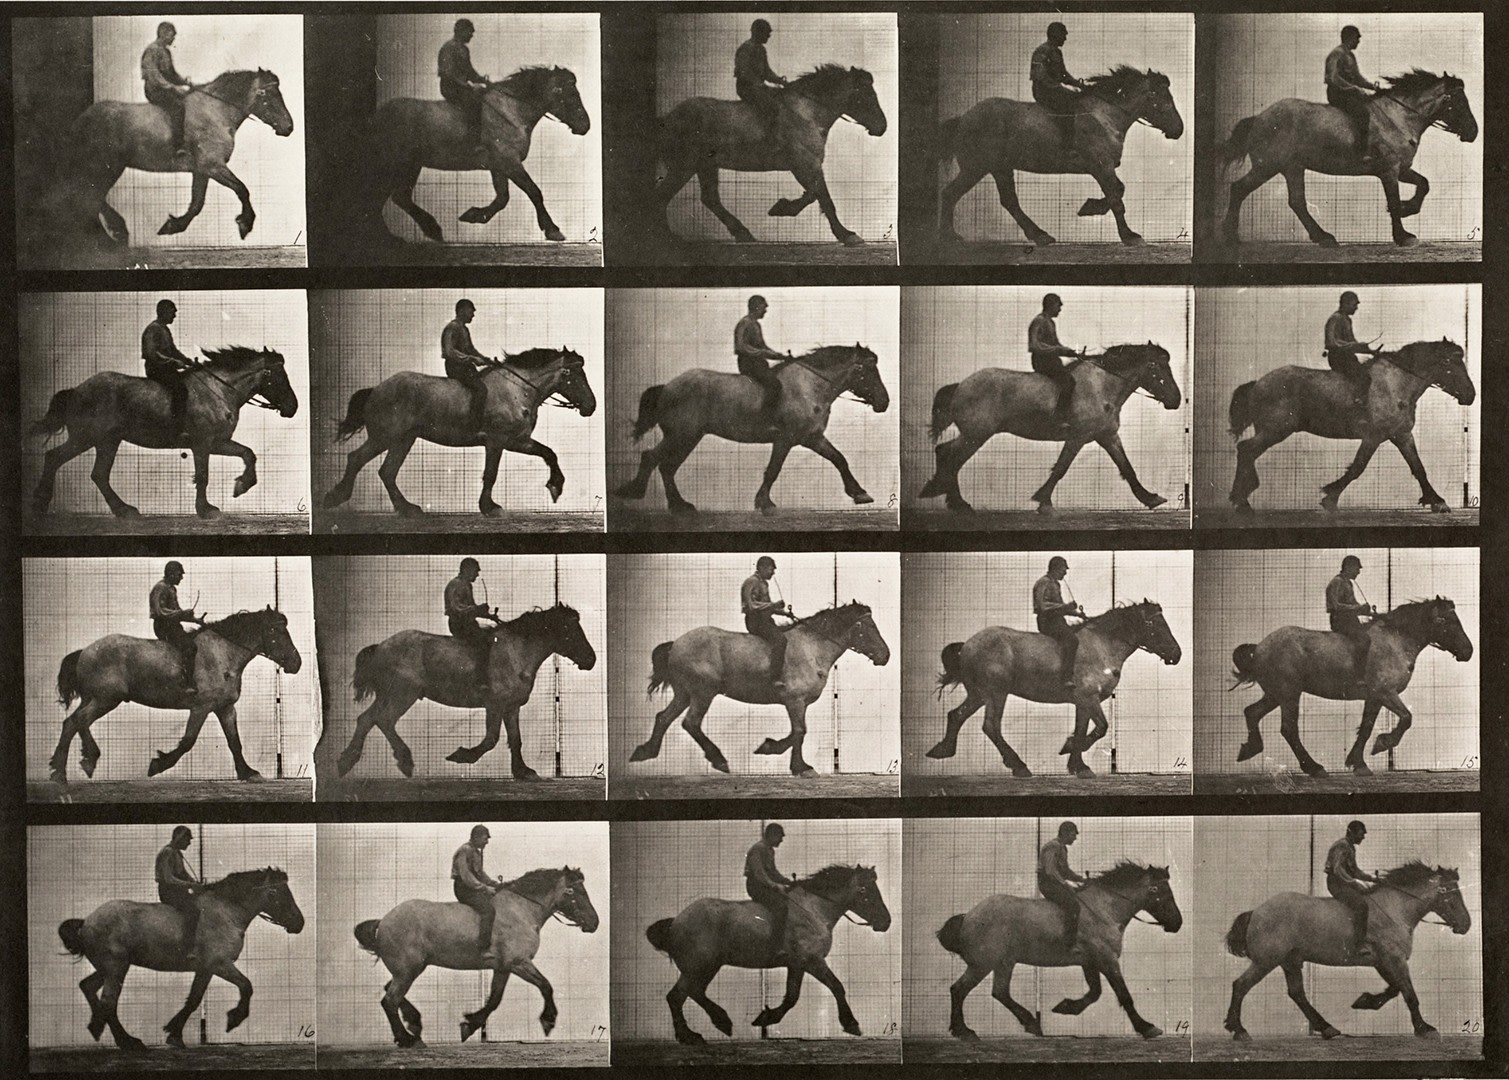 Sequence of black and white photos showing the movements of a large walking horse with a rider